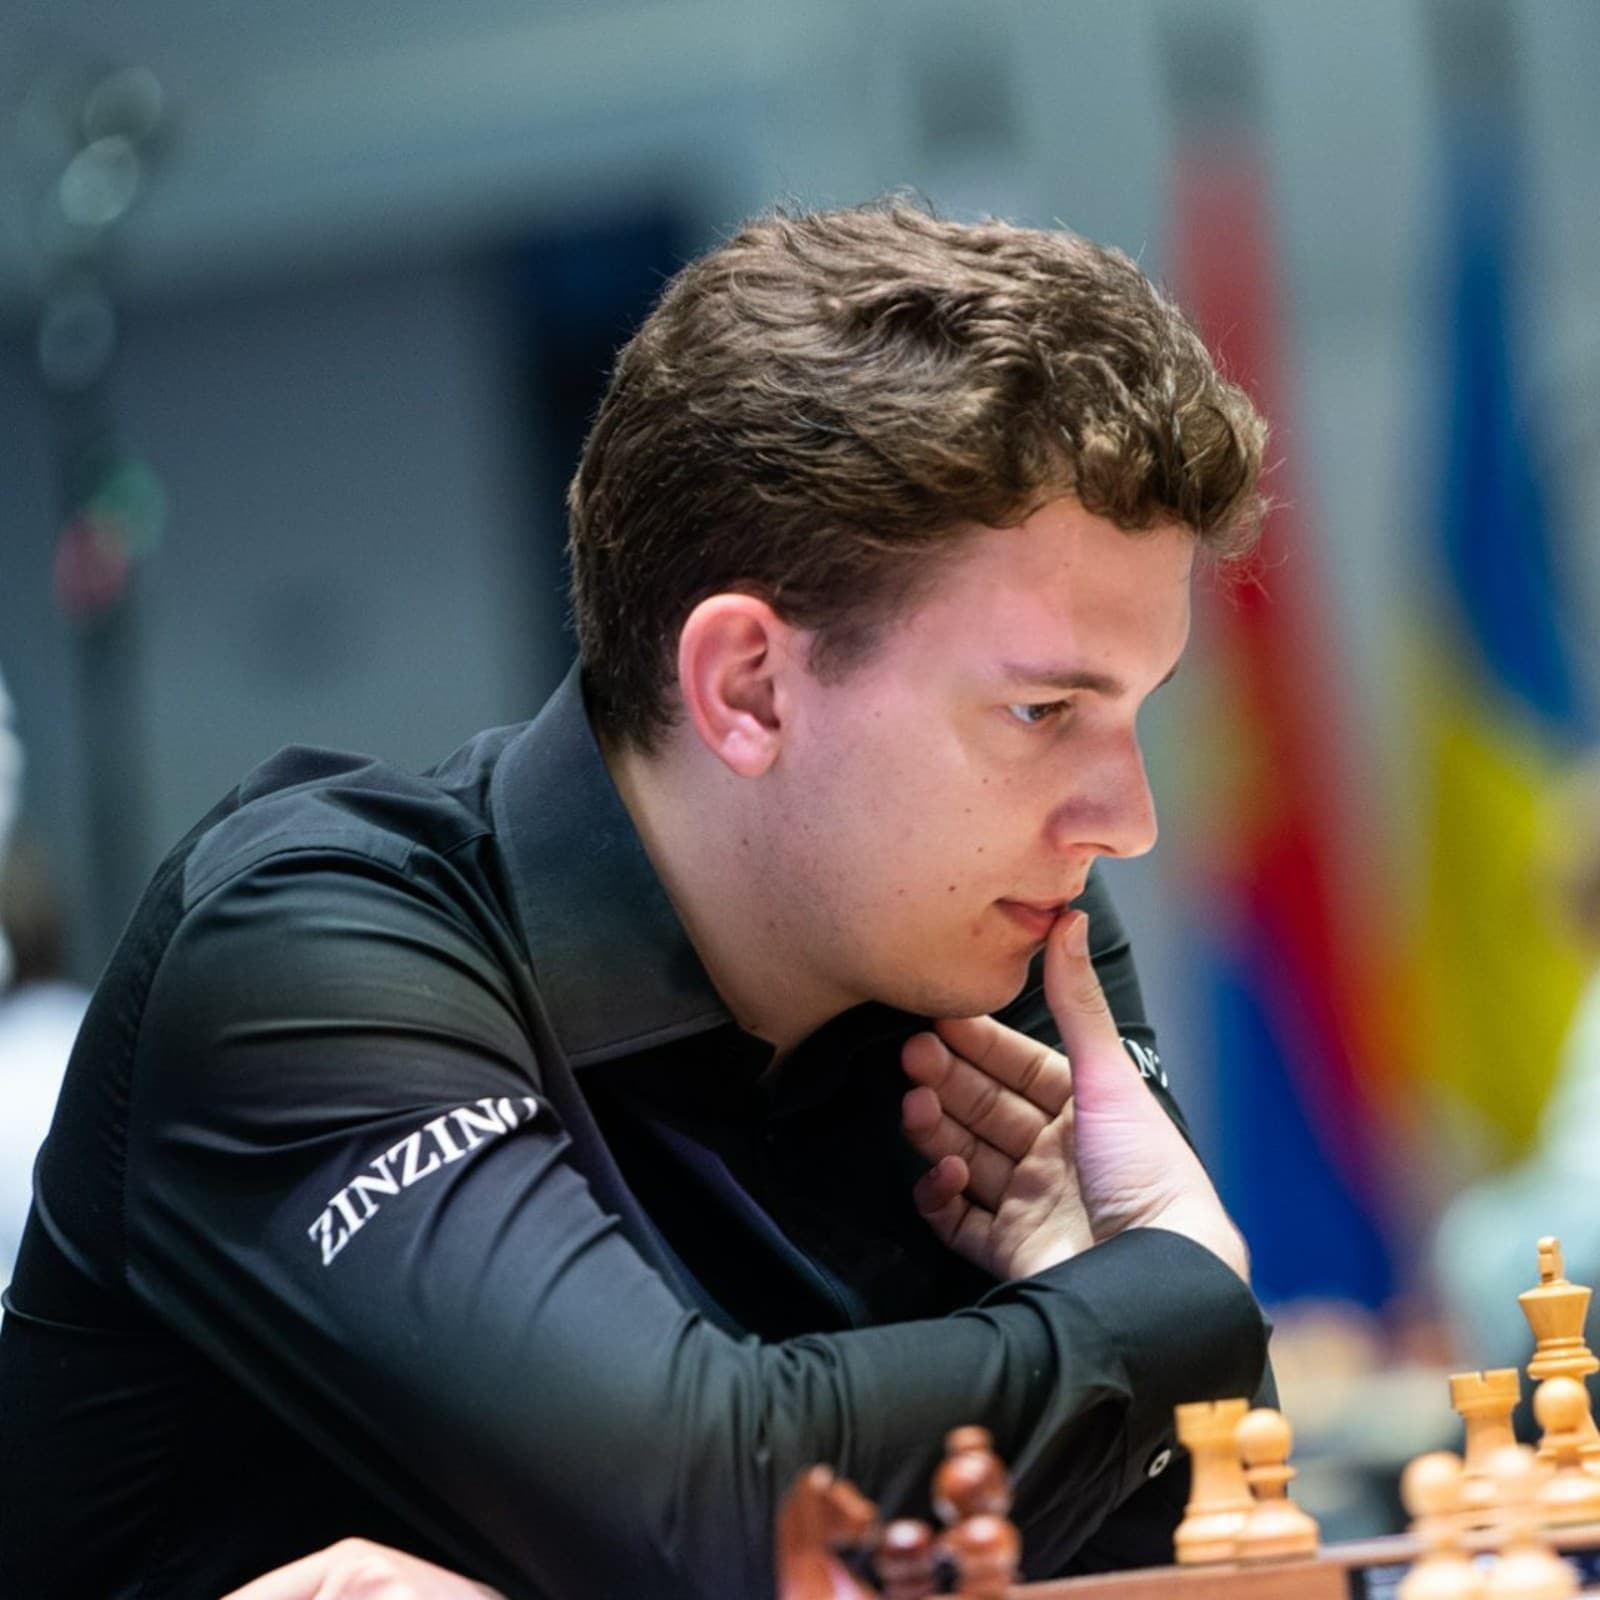 Chess: Carlsen knocked out of World Cup semi as Poland's Duda emerges, Magnus Carlsen